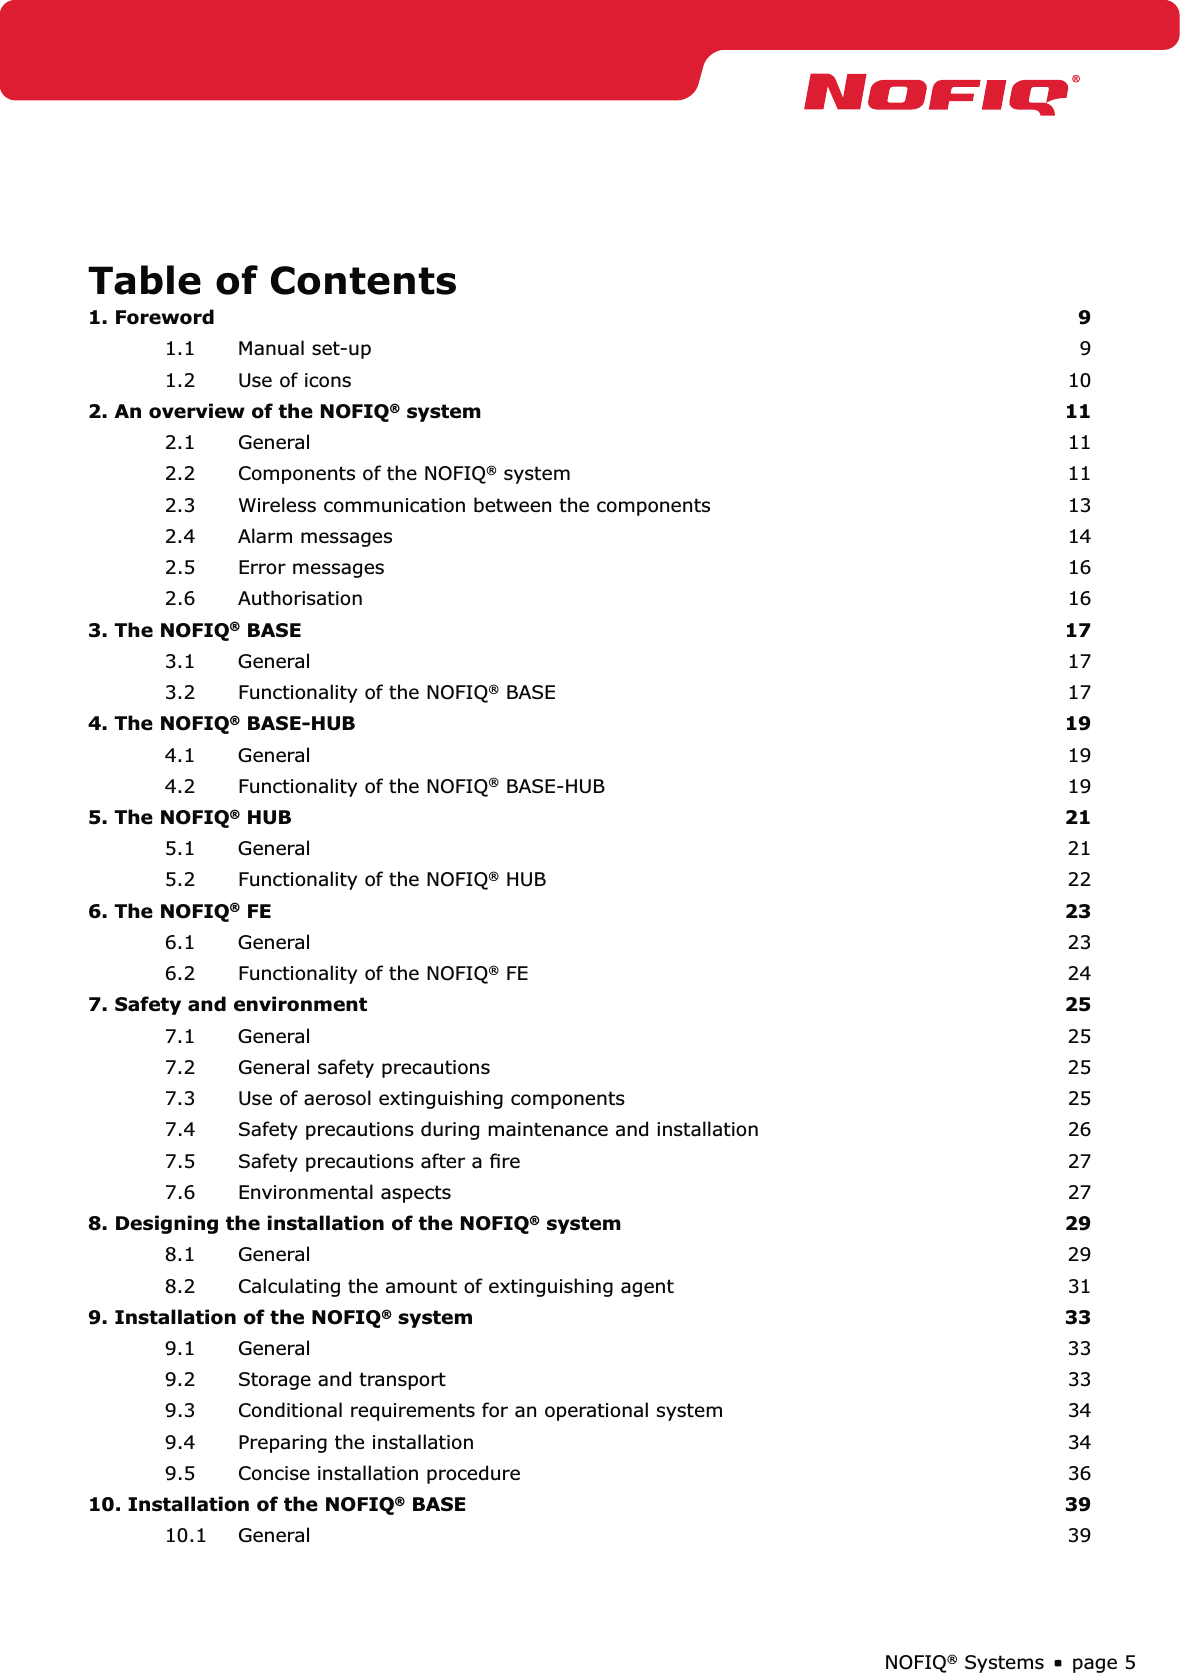 page 5NOFIQ® SystemsTable of Contents1. Foreword  91.1 Manual set-up  91.2  Use of icons  102. An overview of the NOFIQ® system  112.1 General  112.2  Components of the NOFIQ® system  112.3  Wireless communication between the components  132.4 Alarm messages  142.5 Error messages  162.6 Authorisation  163. The NOFIQ® BASE  173.1 General  173.2  Functionality of the NOFIQ® BASE  174. The NOFIQ® BASE-HUB  194.1 General  194.2  Functionality of the NOFIQ® BASE-HUB  195. The NOFIQ® HUB  215.1 General  215.2  Functionality of the NOFIQ® HUB  226. The NOFIQ® FE   236.1 General  236.2  Functionality of the NOFIQ® FE  247. Safety and environment  257.1 General  257.2  General safety precautions  257.3  Use of aerosol extinguishing components  257.4  Safety precautions during maintenance and installation  267.5  Safety precautions after a ﬁre   277.6 Environmental aspects  278. Designing the installation of the NOFIQ® system  298.1 General  298.2  Calculating the amount of extinguishing agent  319. Installation of the NOFIQ® system  339.1 General  339.2  Storage and transport  339.3  Conditional requirements for an operational system  349.4  Preparing the installation  349.5  Concise installation procedure   3610. Installation of the NOFIQ® BASE  3910.1 General  39